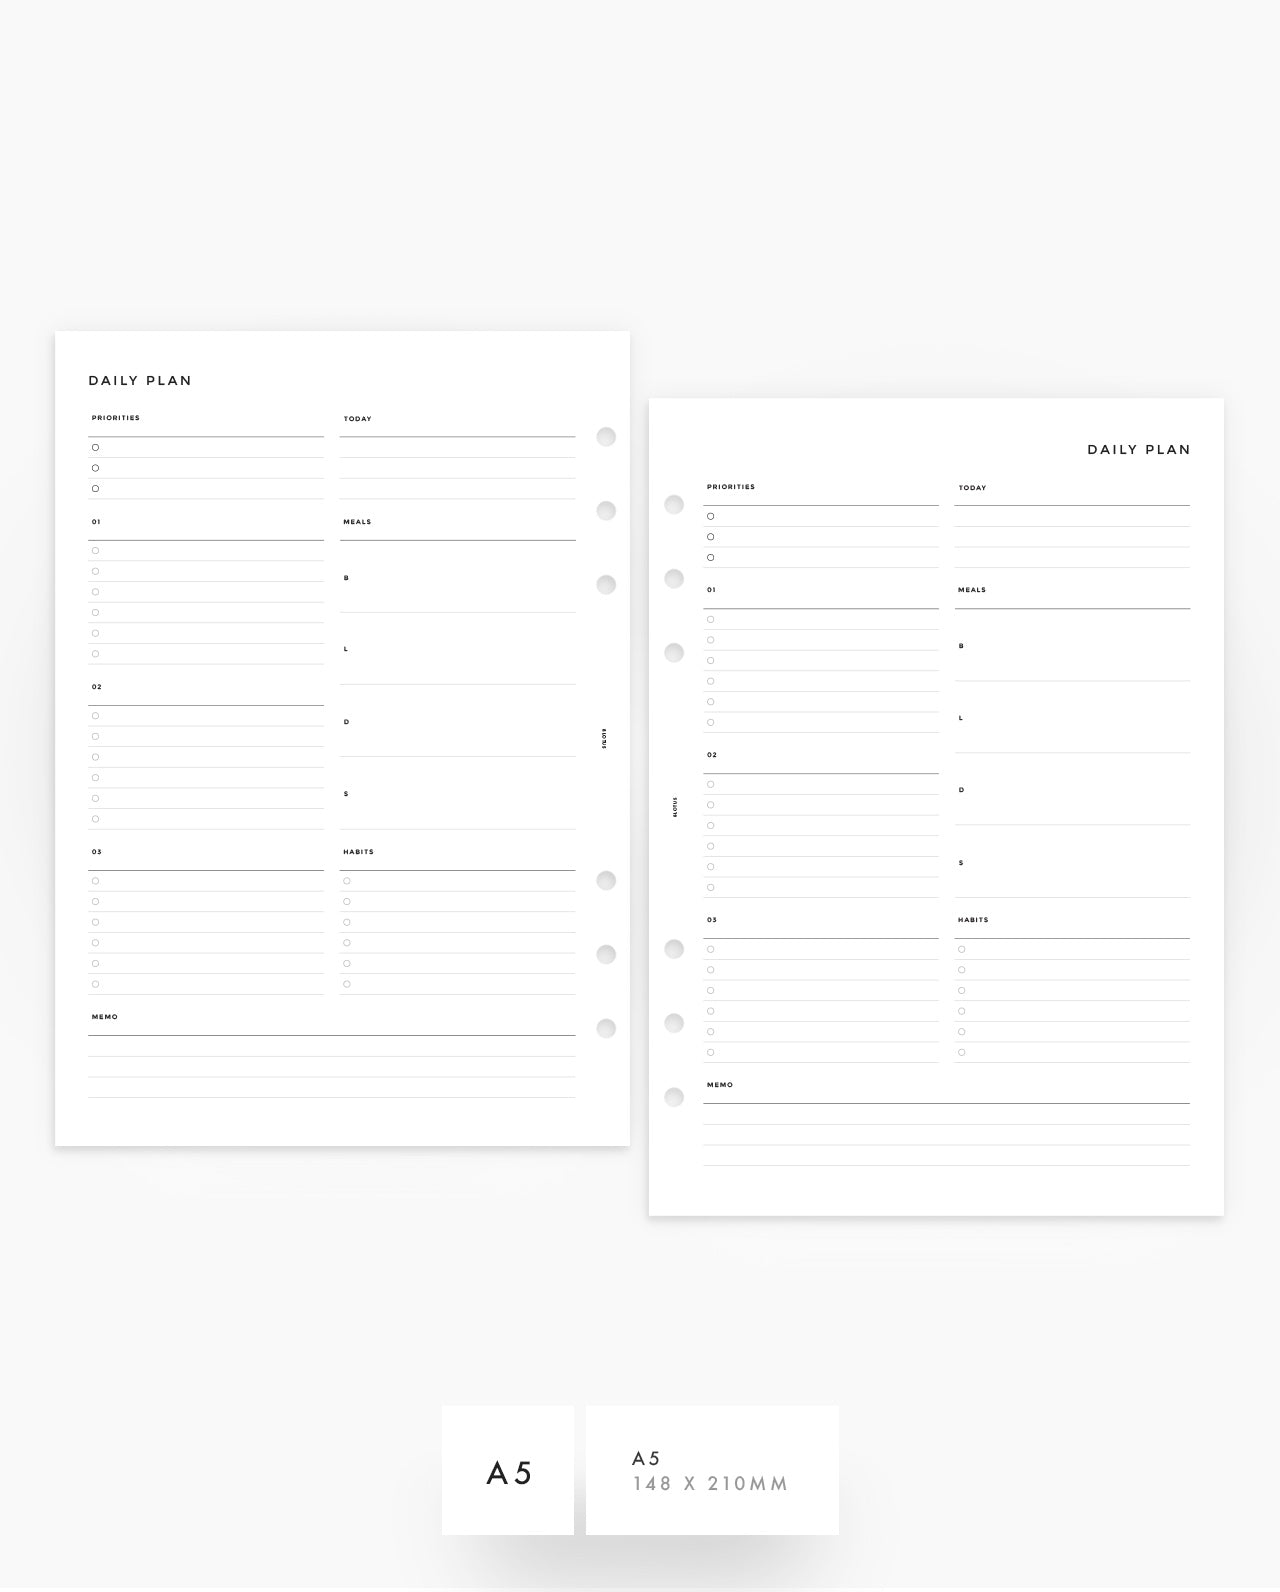 MN017 - DAILY PLANNER - LISTS, MENU, HABITS